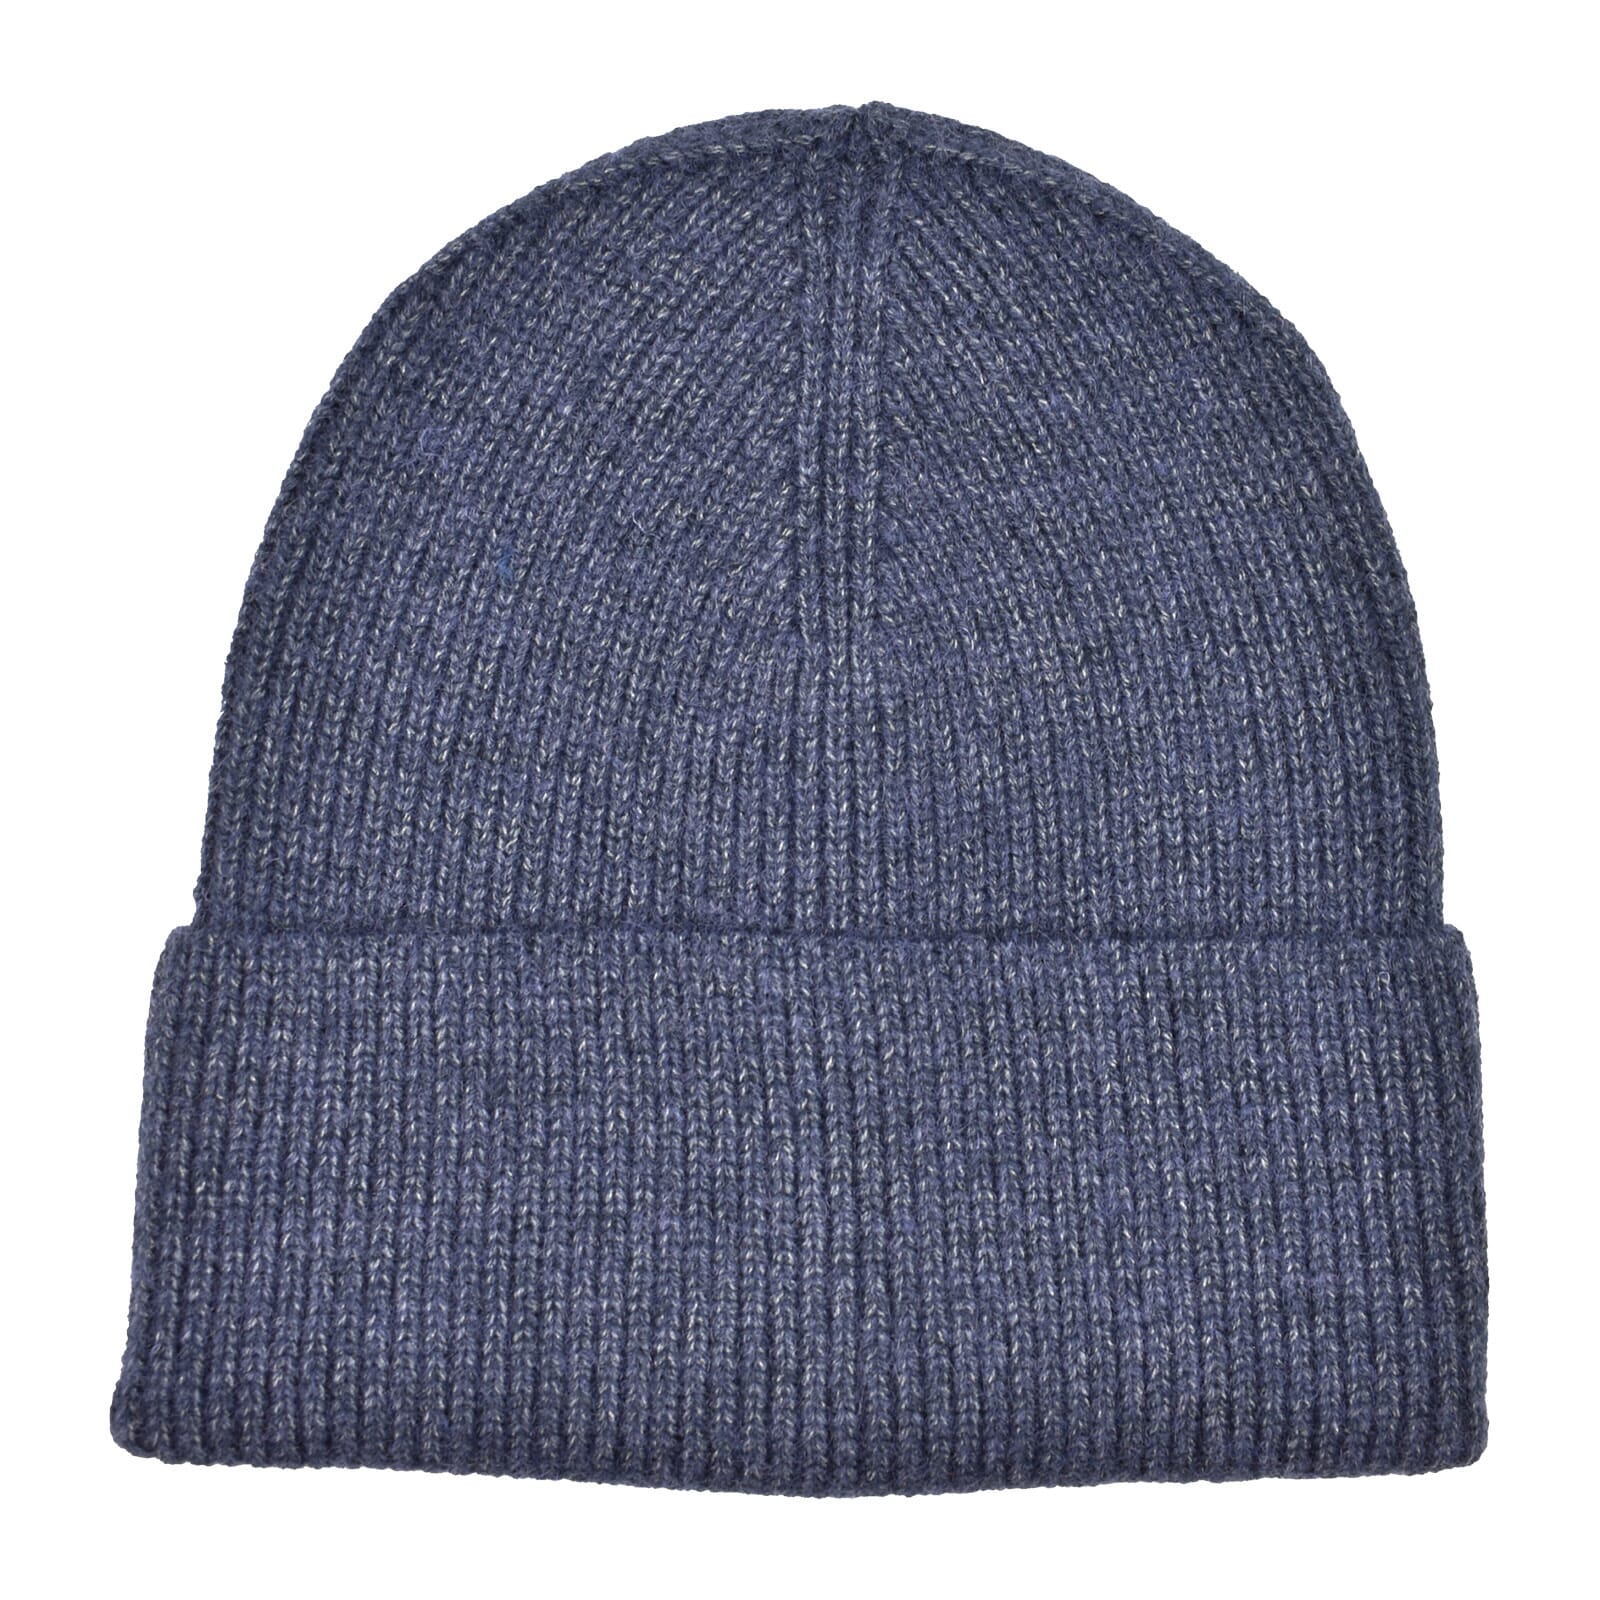 Exclusive Knitted Hat - Market Rasen